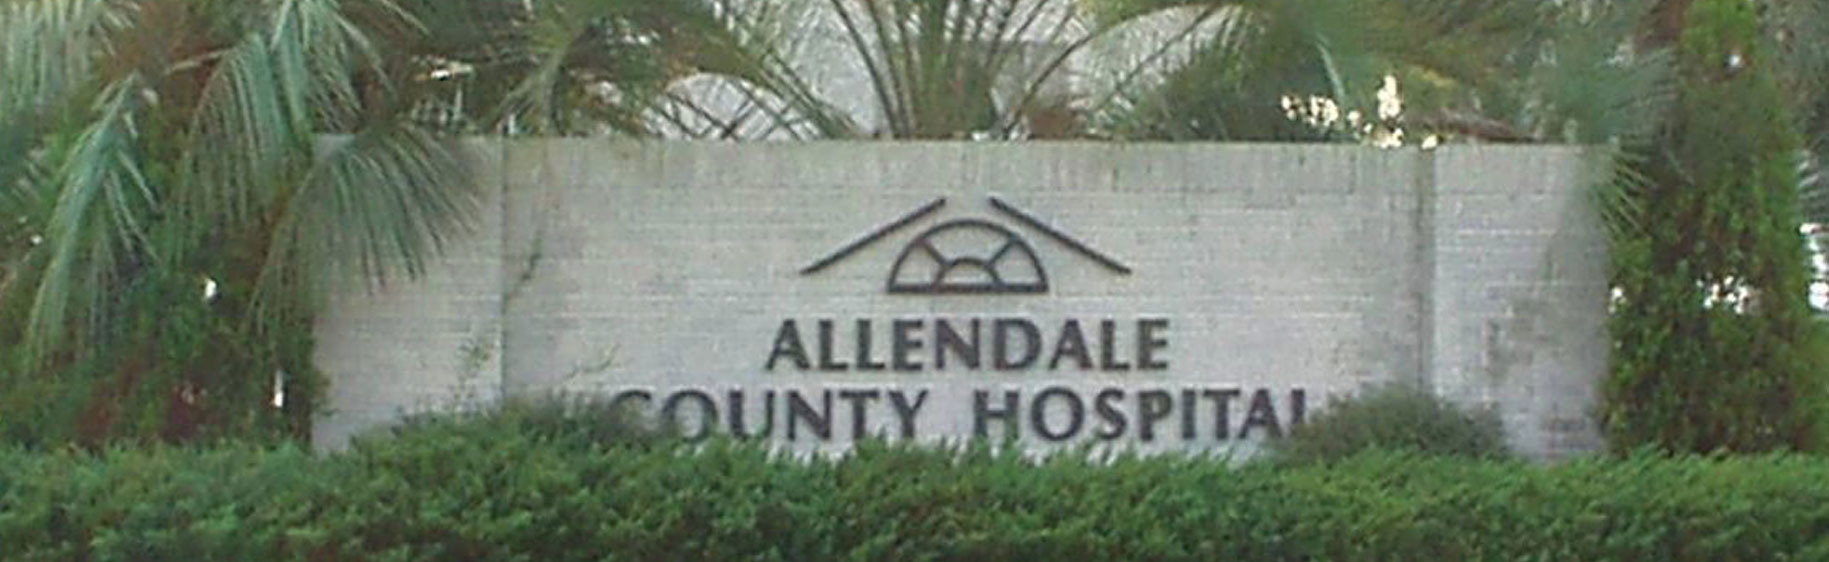 Pictured is the main Hospital sign